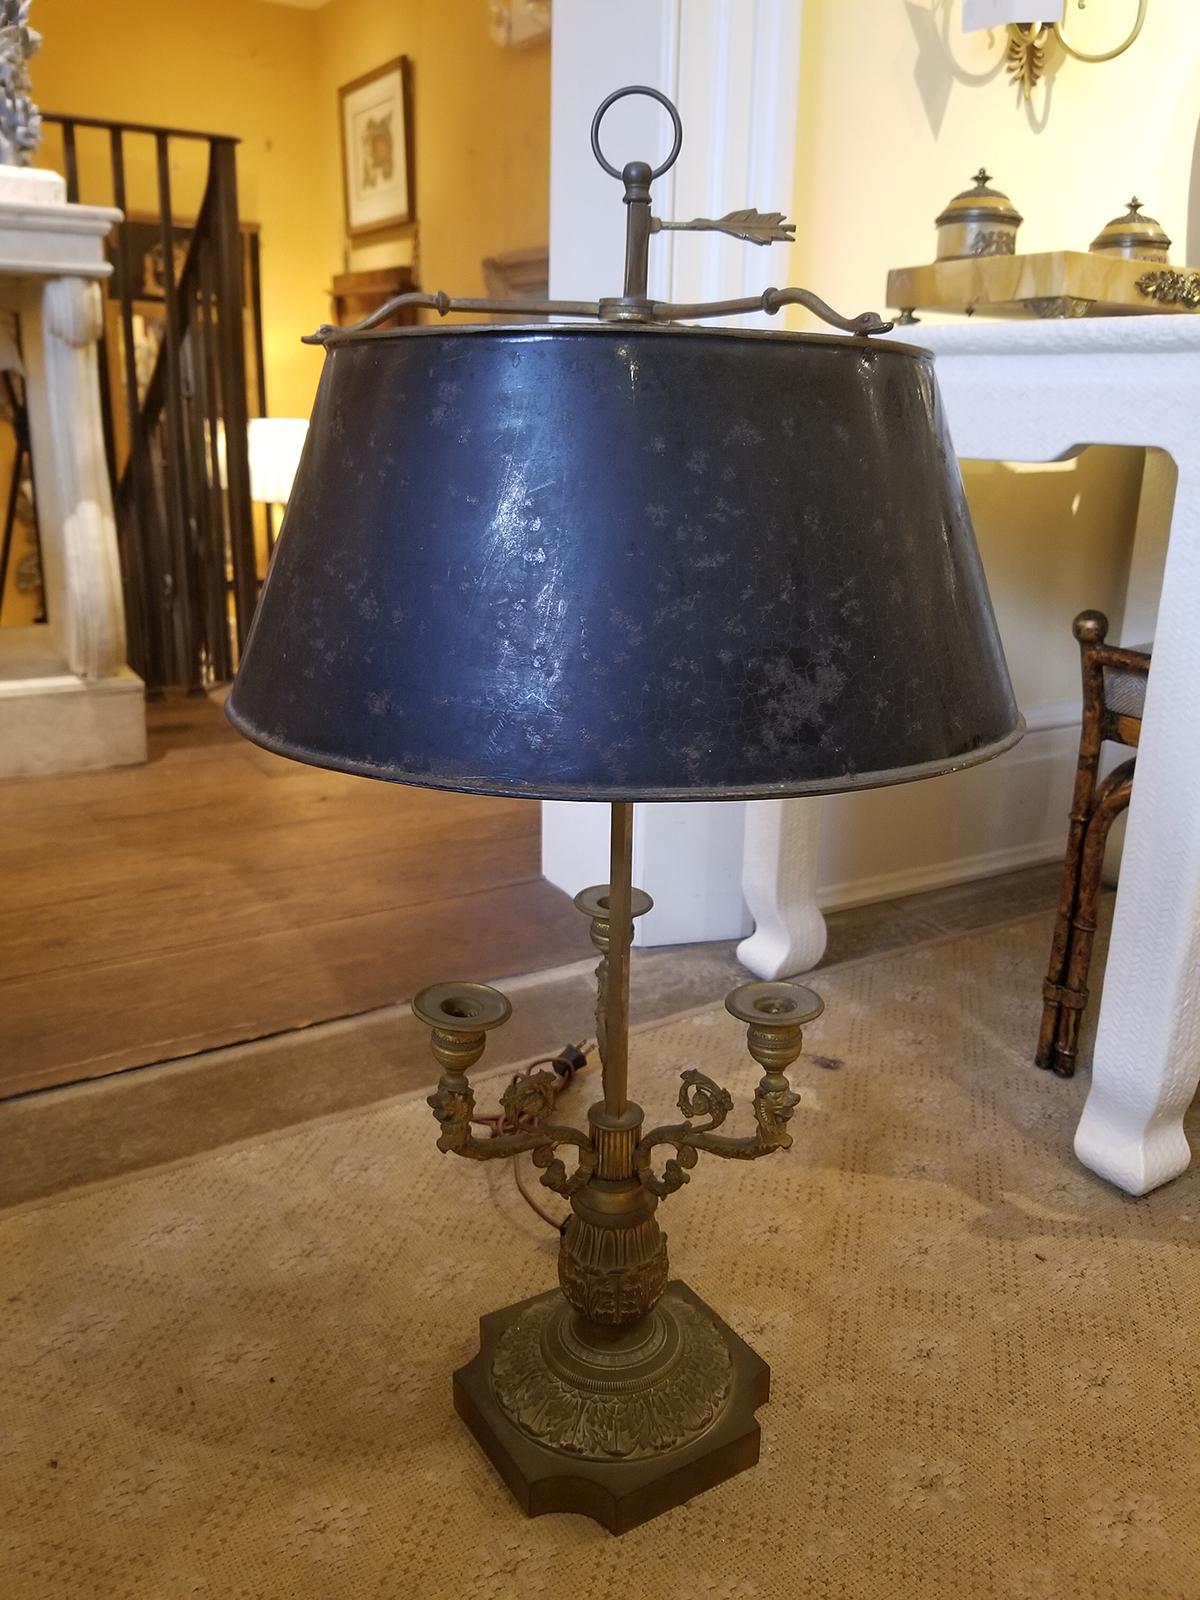 Late 19th century bronze three-arm Bouillotte desk lamp with black tole shade
new wiring.